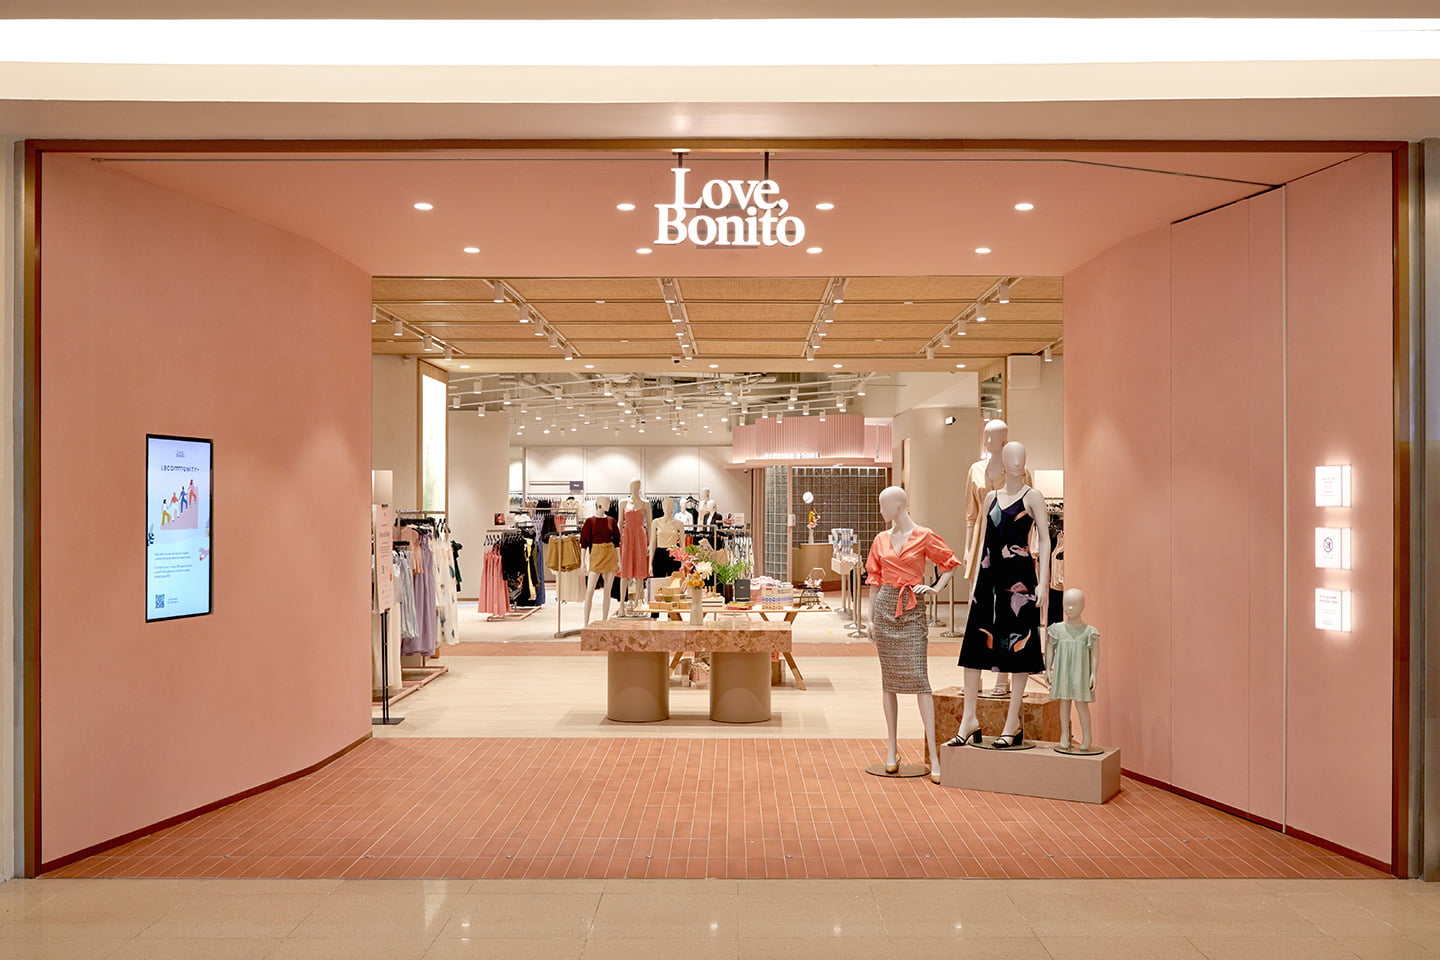 Love, Bonito opens revamped store in Jakarta in prominent location